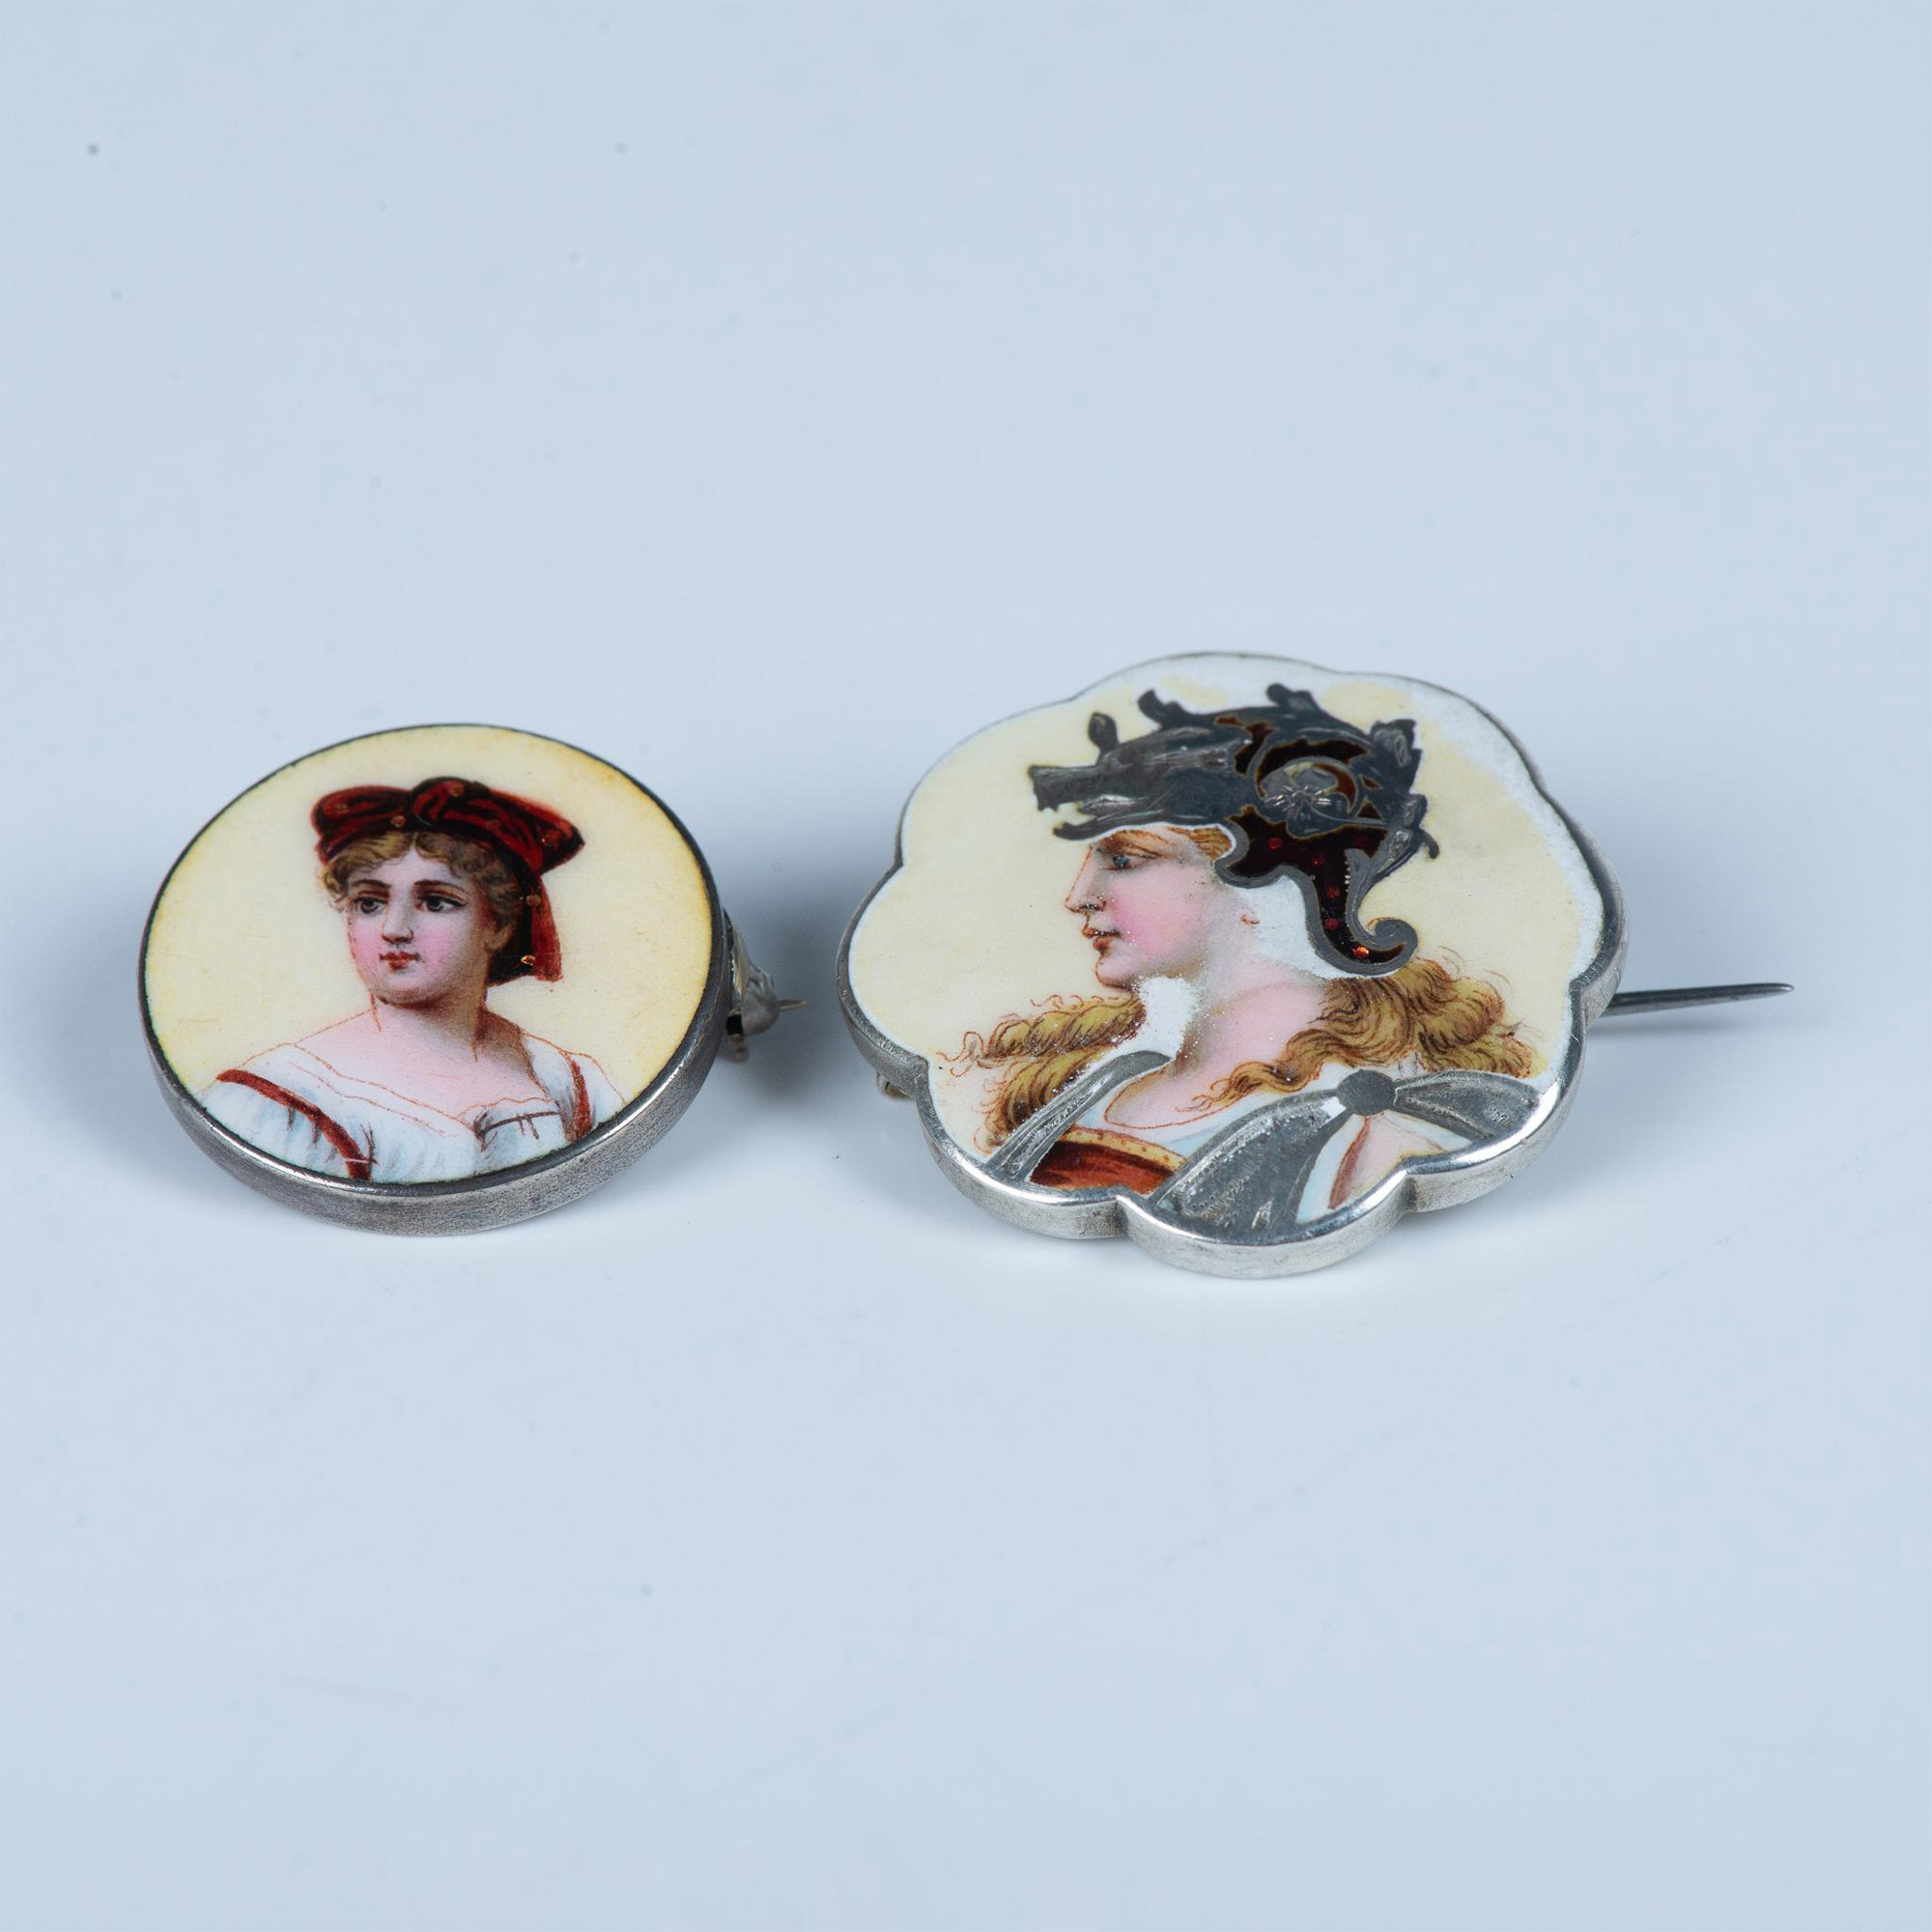 2pcs Sterling Silver and Enamel Portrait Brooches - Image 4 of 4